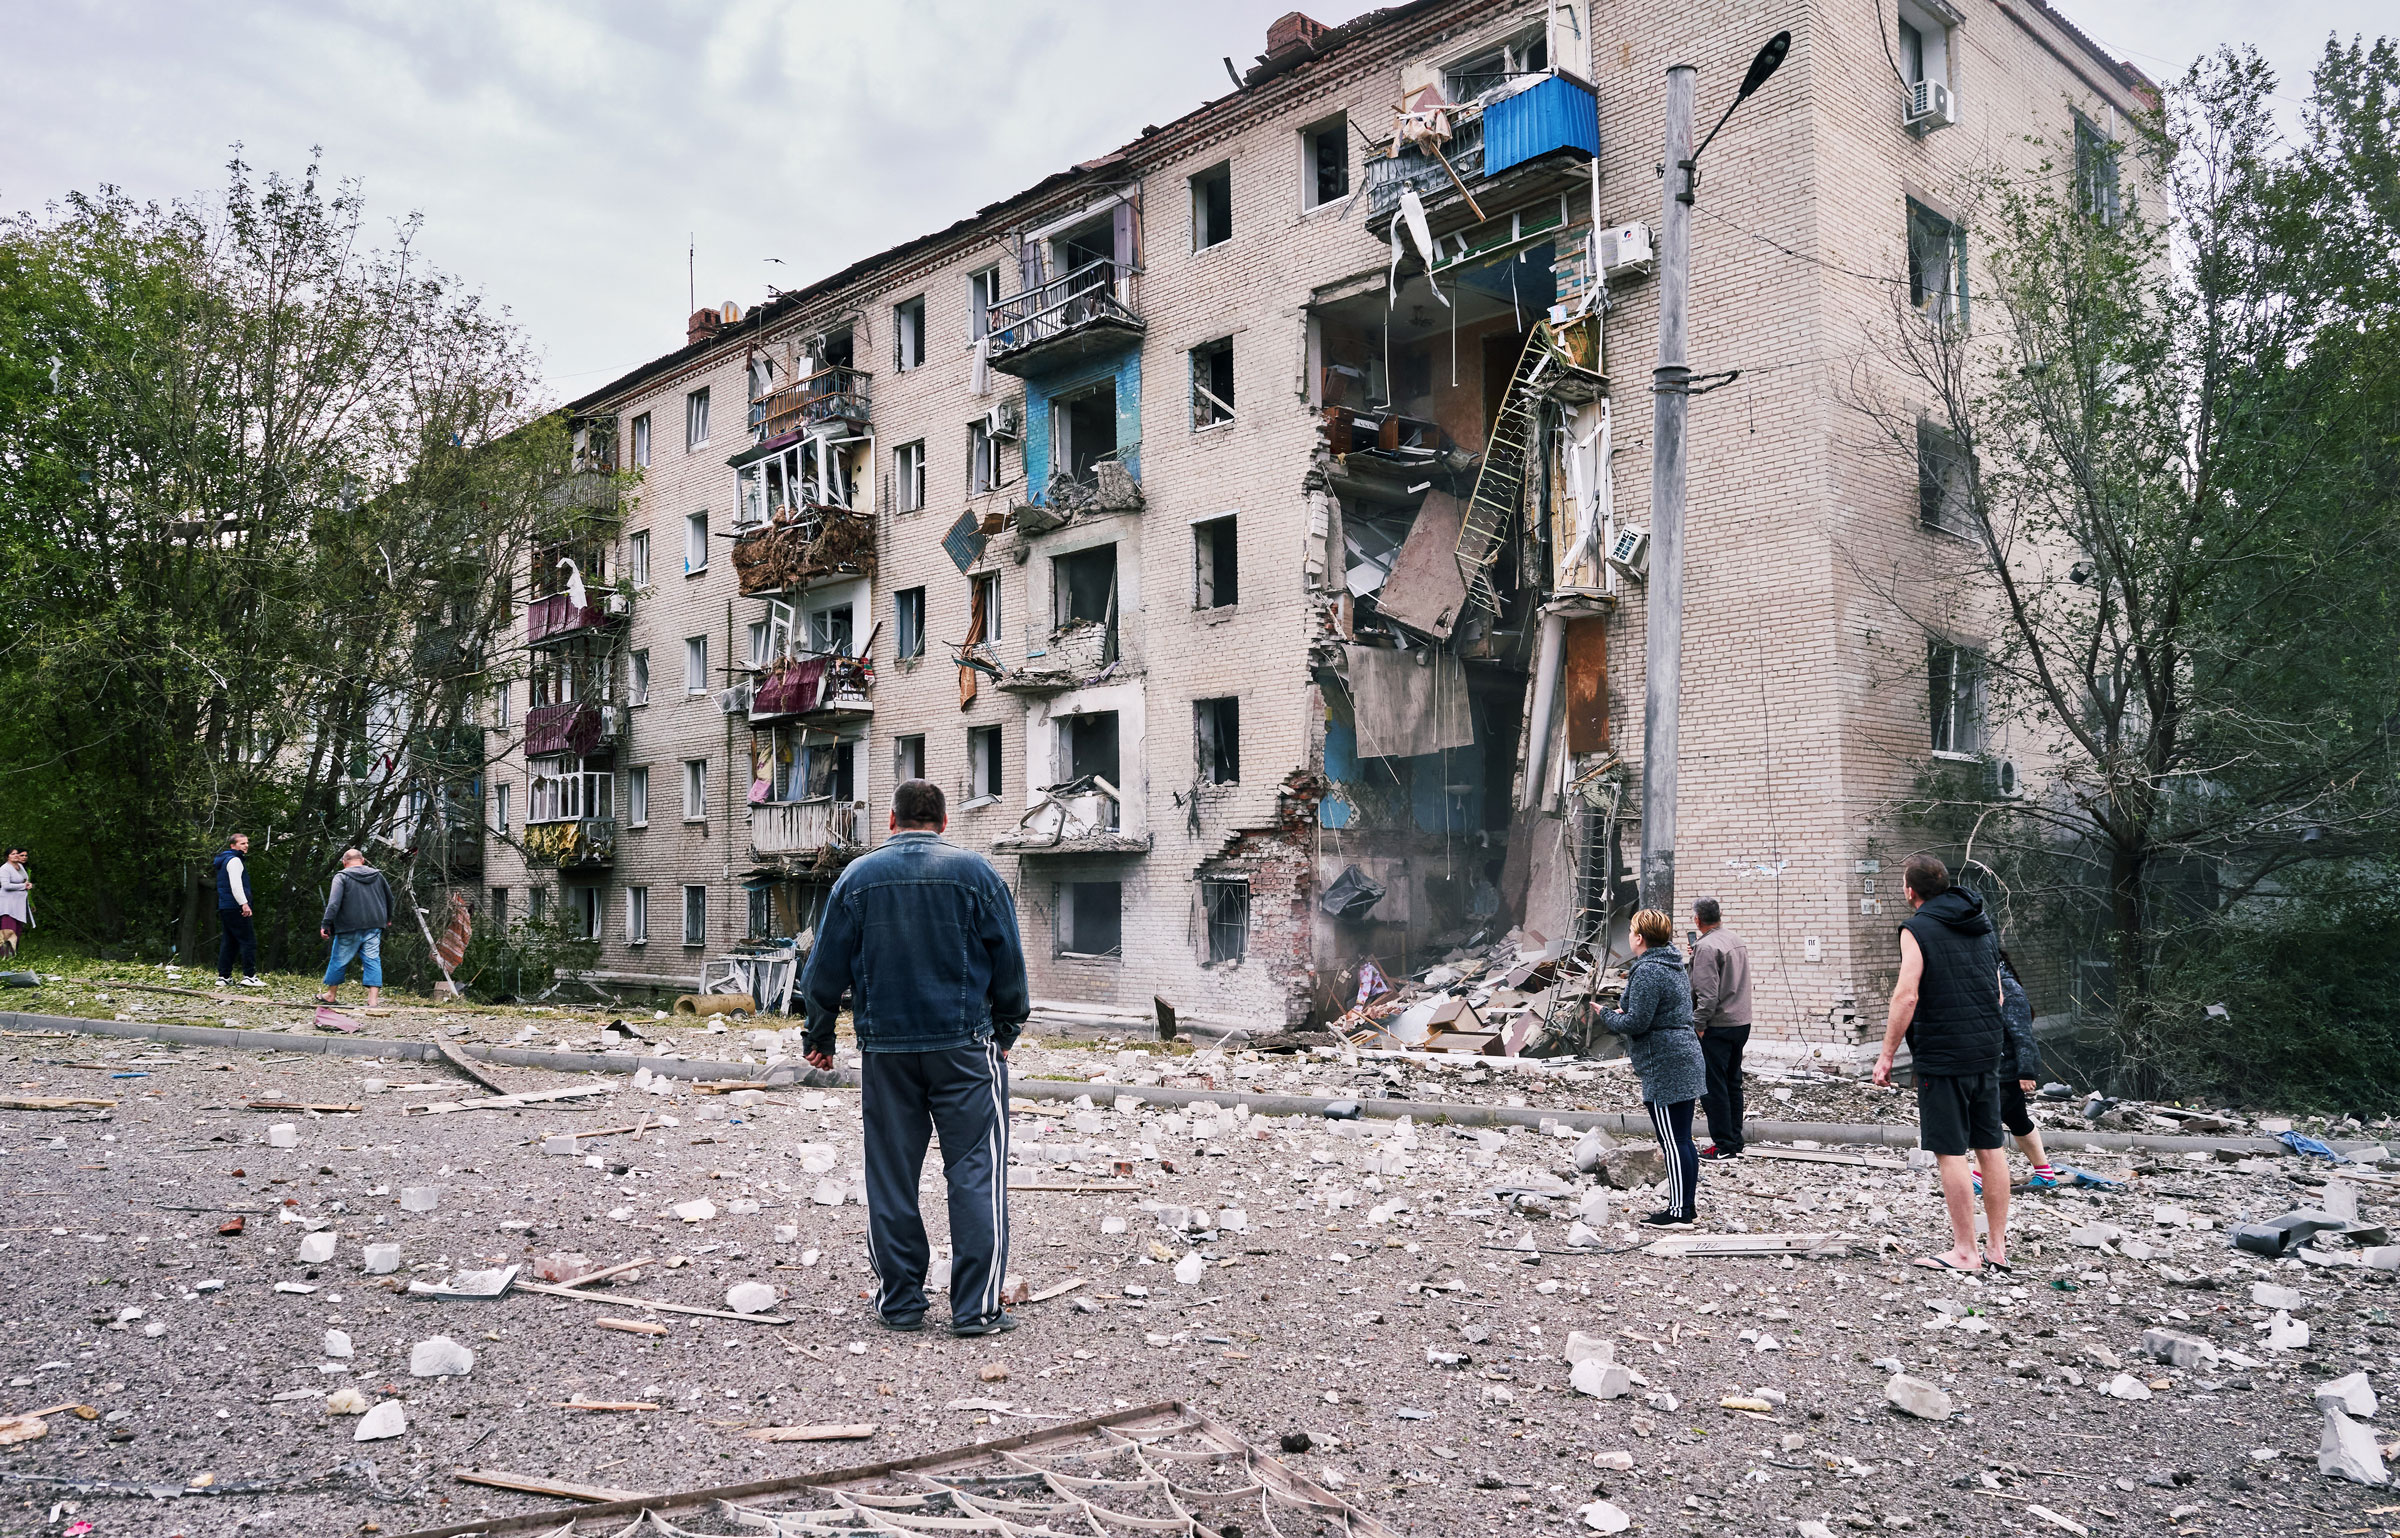 People gather to look at an apartment building damaged by two Russian rockets that hit earlier on Sept. 11, 2022, at around three o'clock in the afternoon, in Donetsk, Ukraine. (Iva Zimova—Panos Pictures/Redux)